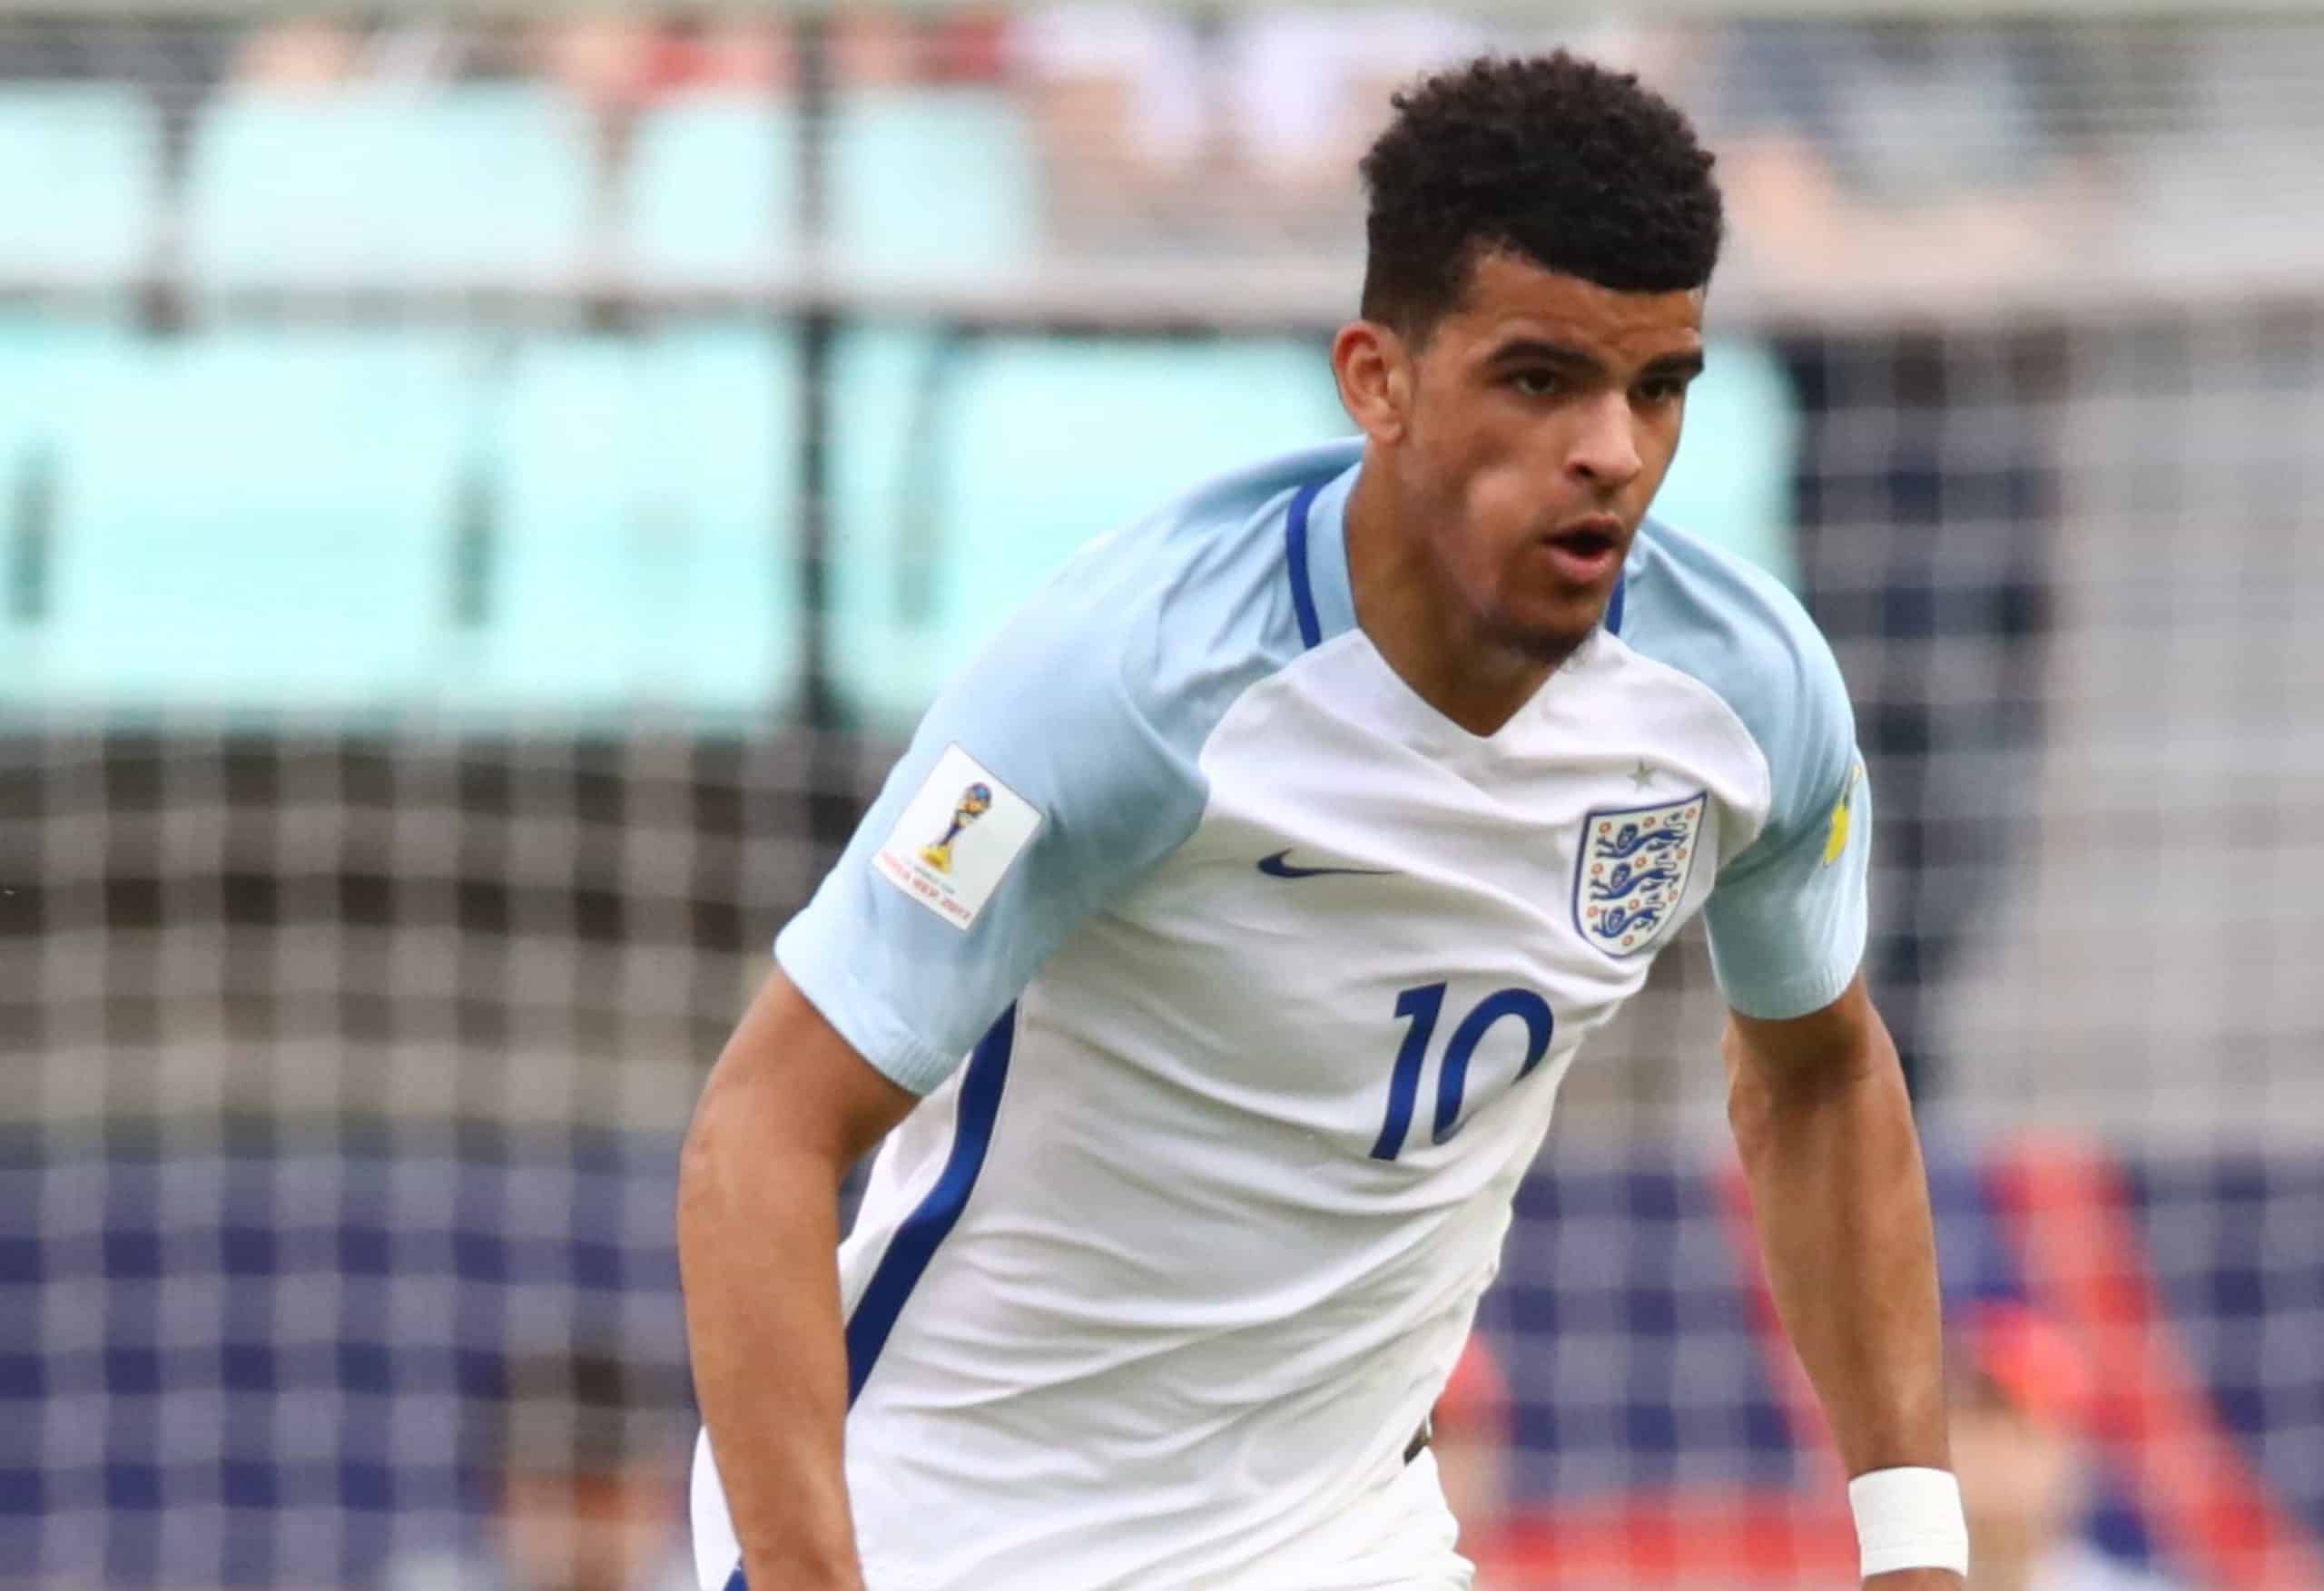 Dominic Solanke (ENG), MAY 20, 2017 - Football / Soccer : 2017 FIFA U-20 Wolrd Cup Group A match between Argentina 0-3 England at Jeonju World Cup Stadium in Suwon, South Korea. (Photo by Sho Tamura/AFLO SPORT)